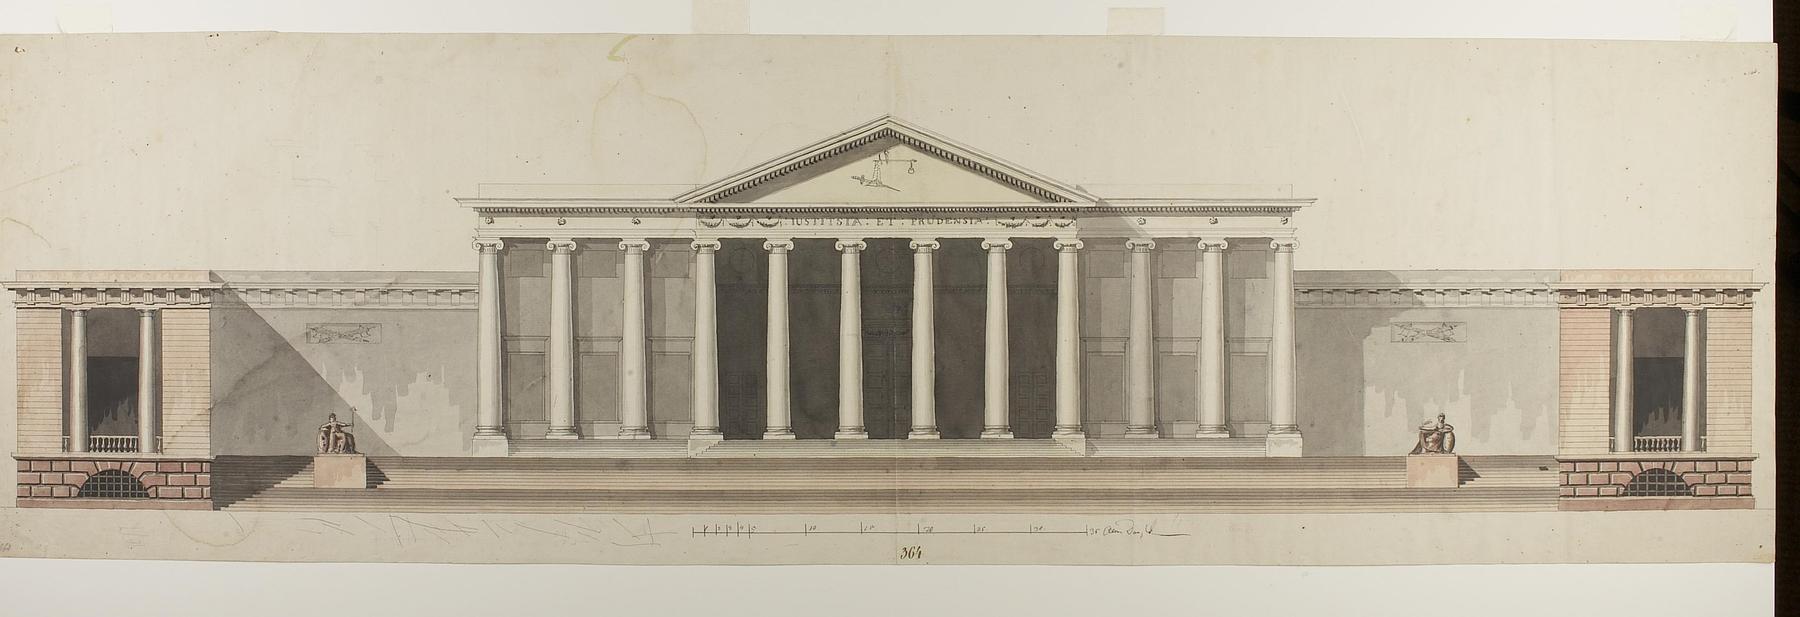 Project for City Hall and Court House in Roman Style, Elevation of Facade, D852